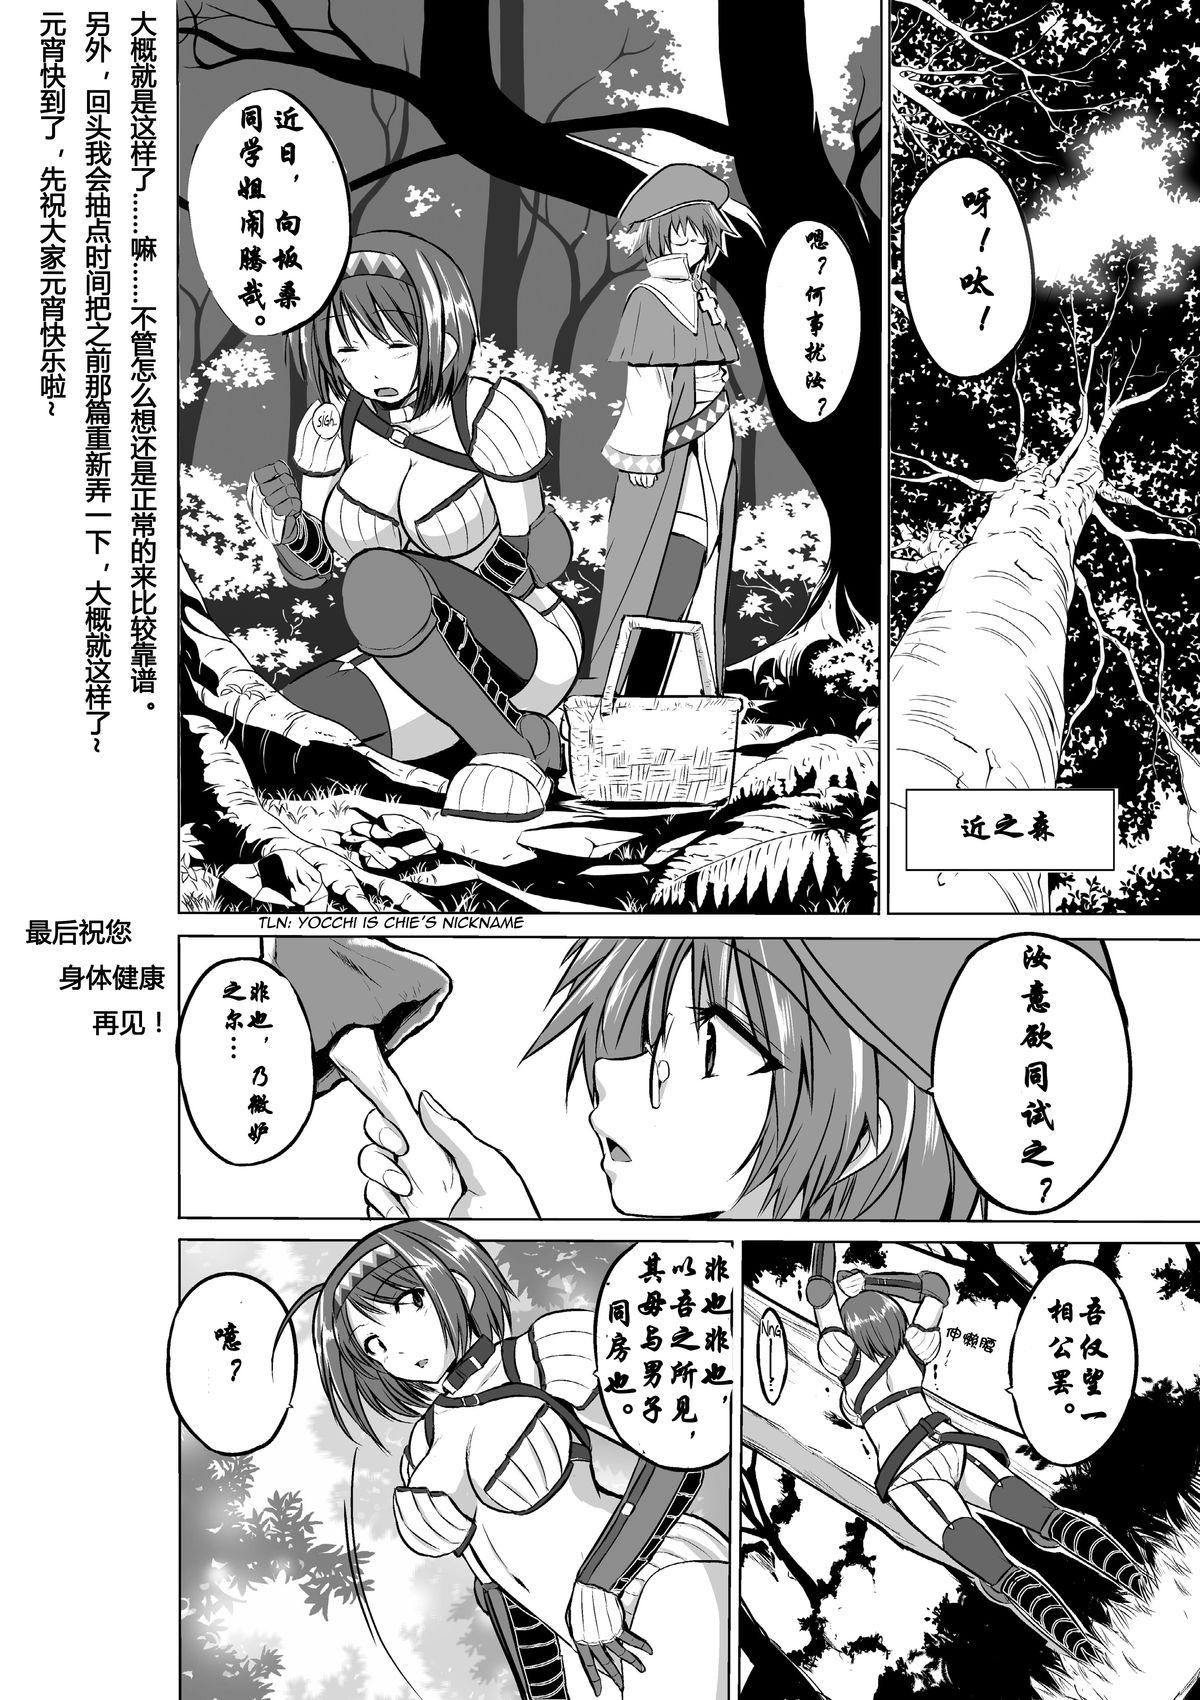 Crossdresser Dungeon Travelers - Chie no Himegoto - Toheart2 Homosexual - Page 29